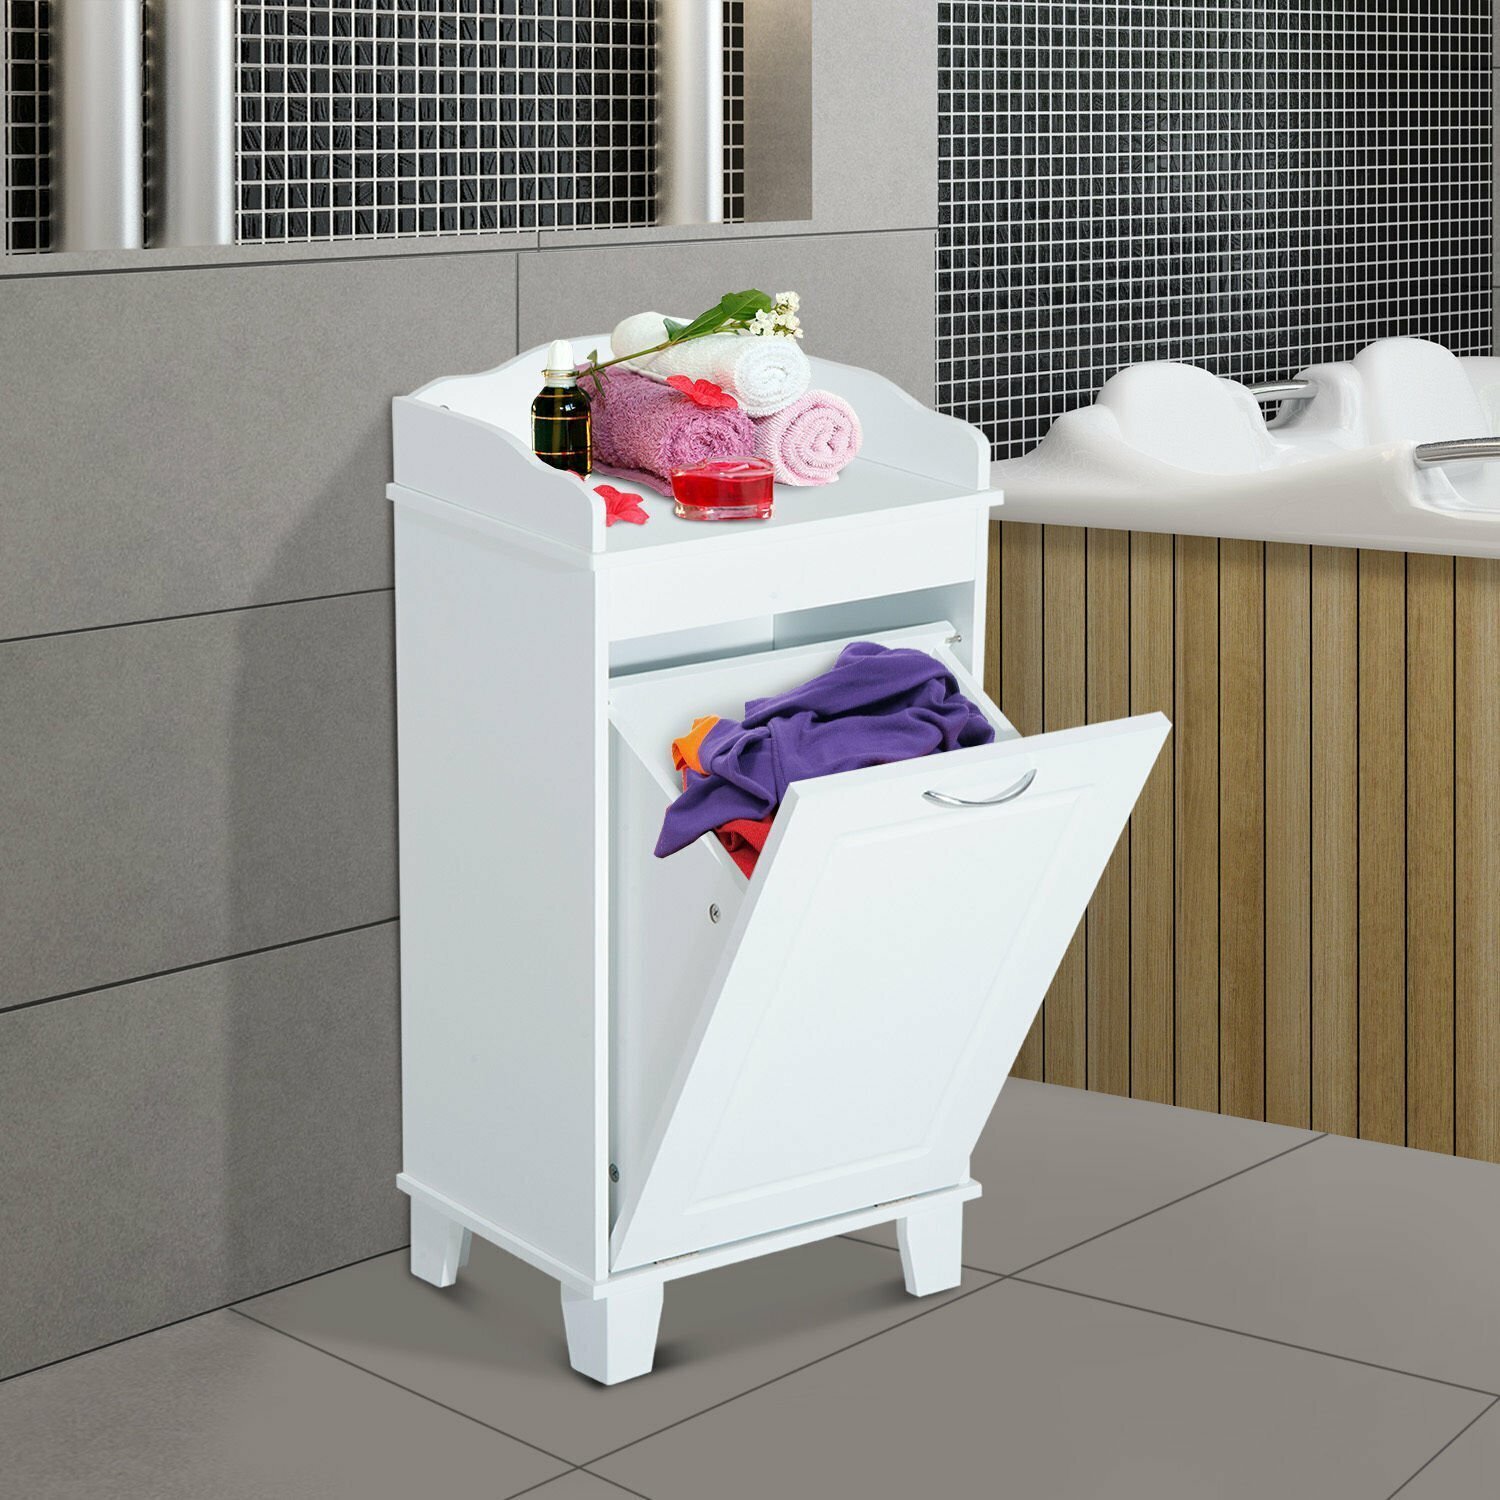 Scalloped Bathroom Cabinet with Laundry Hamper